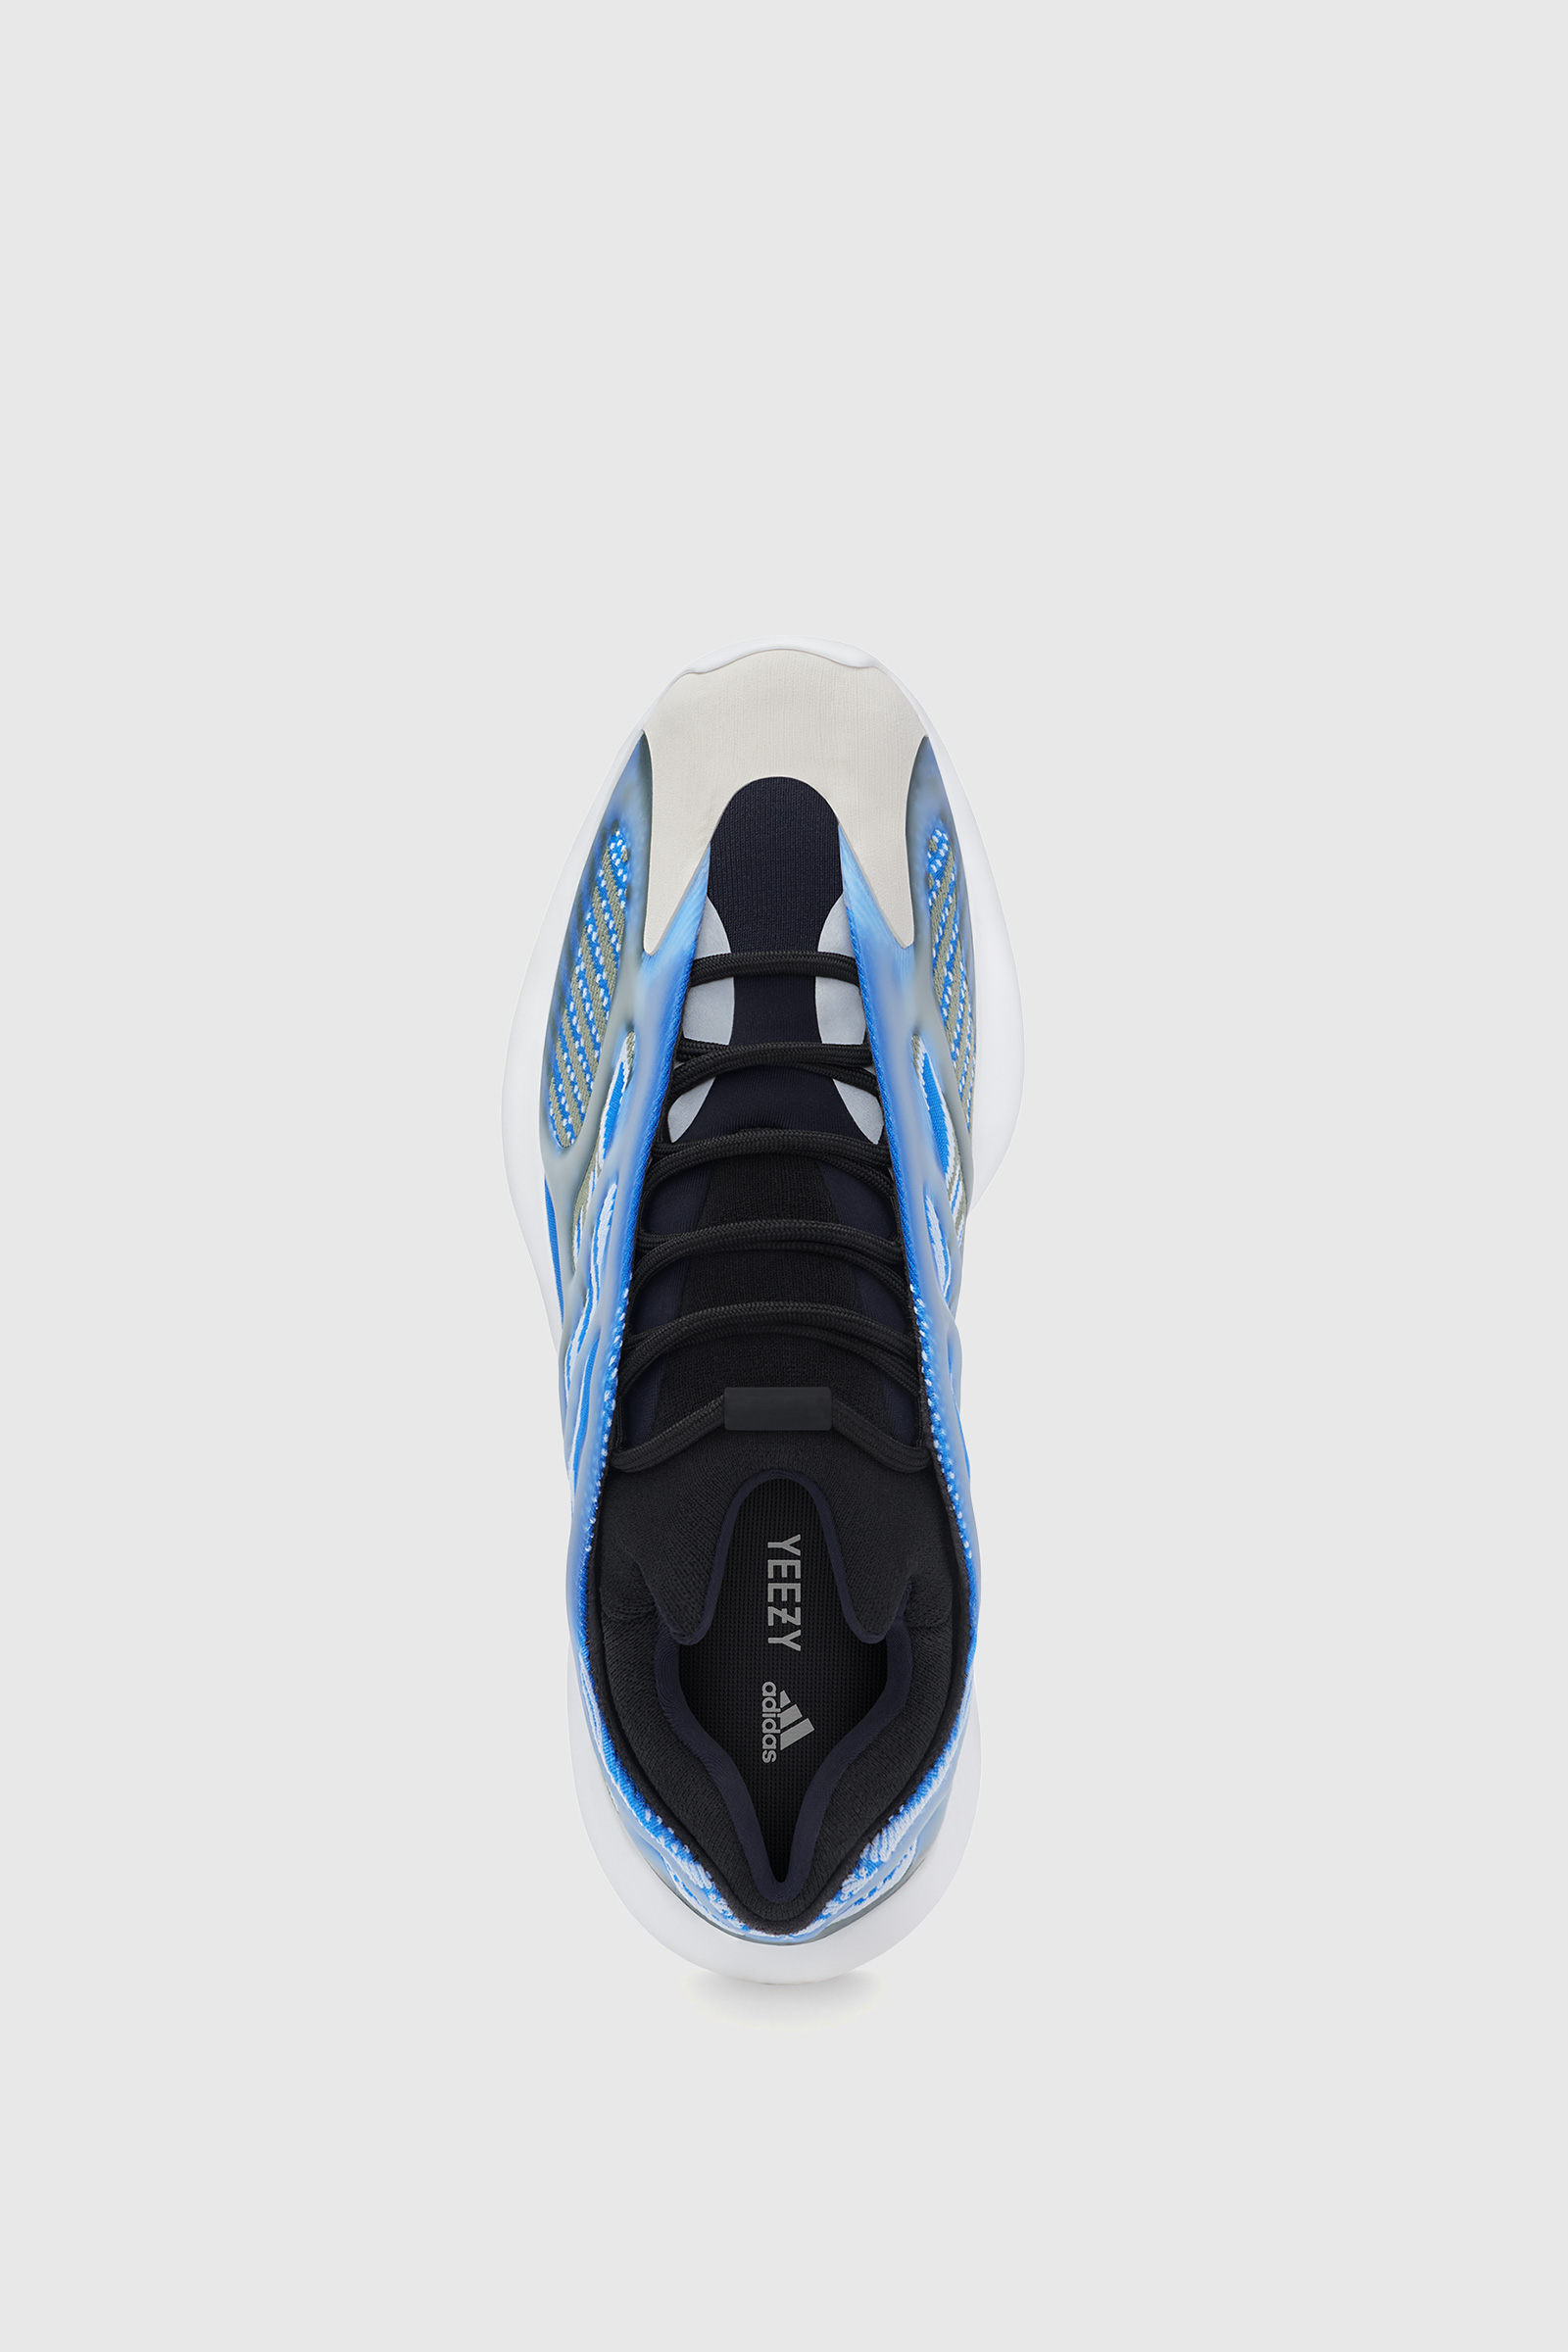 what size to get yeezy 700